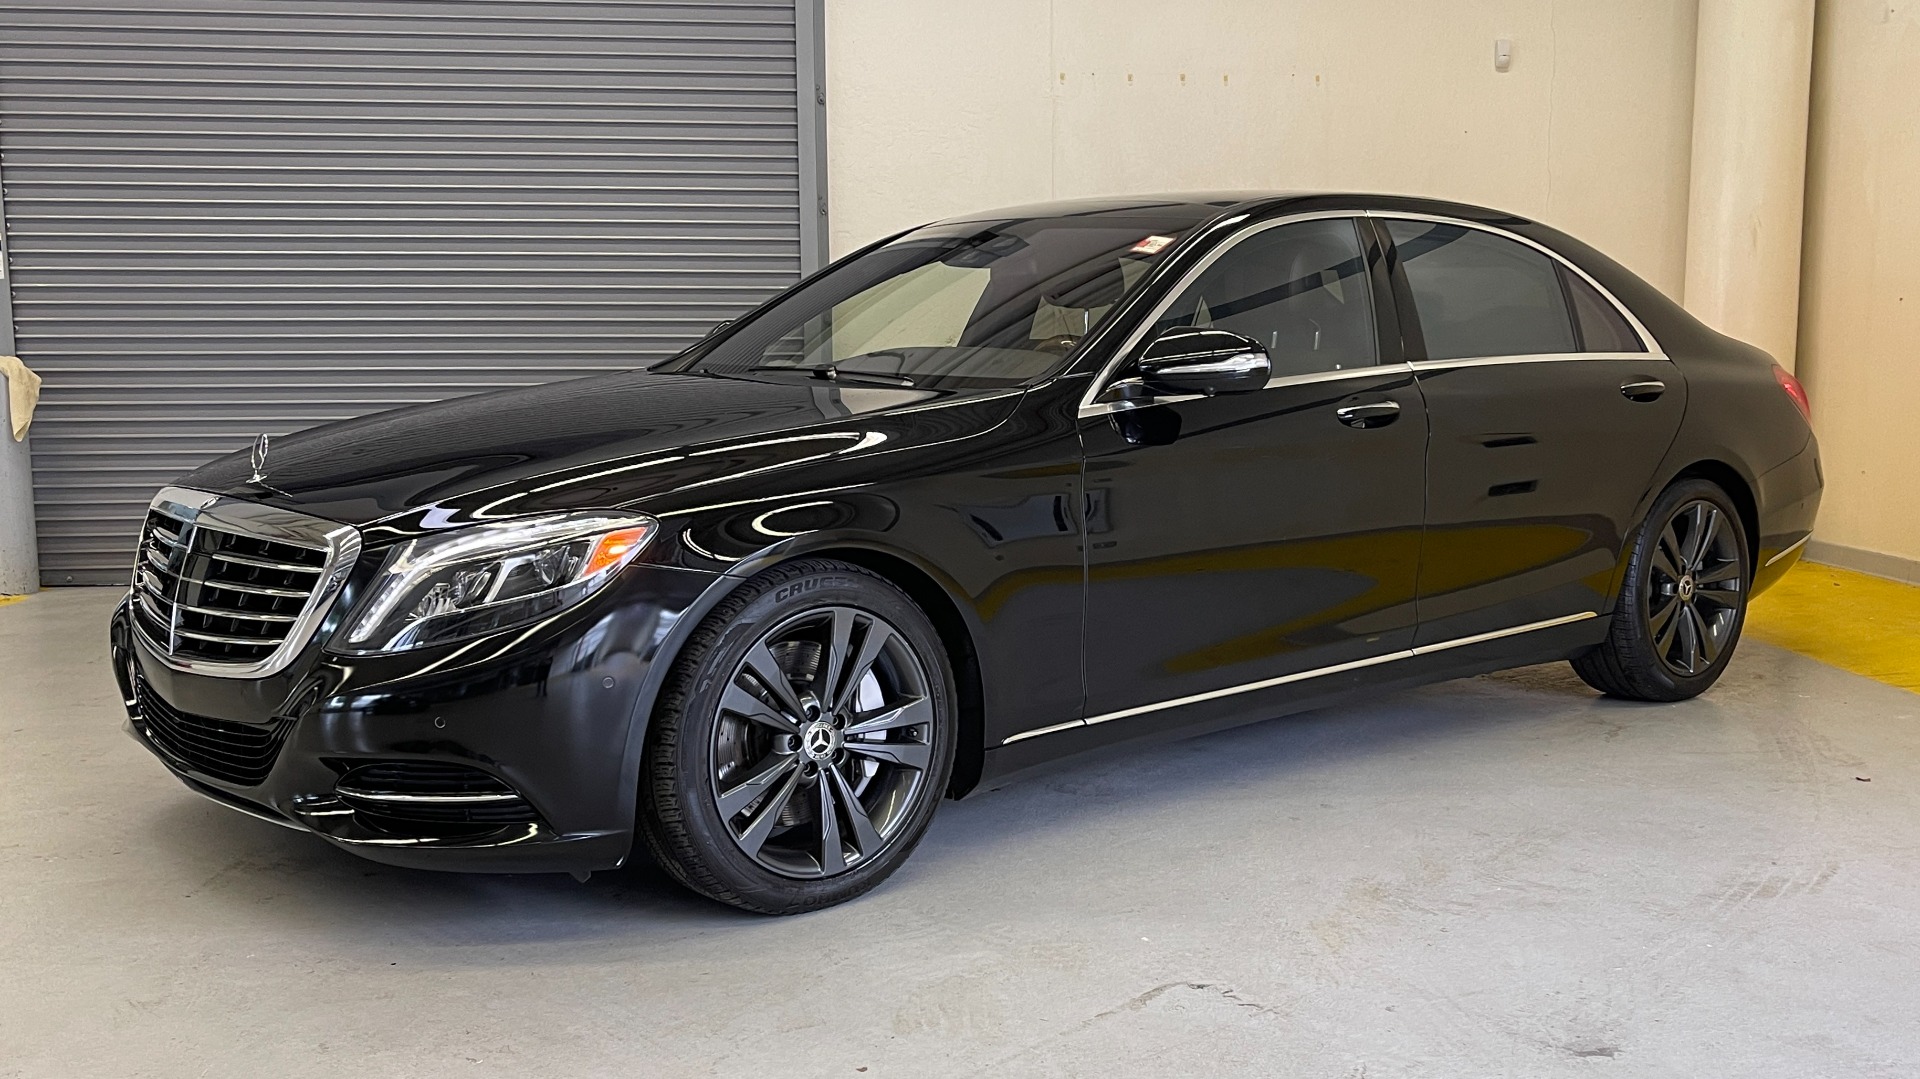 Used 2017 Mercedes-Benz S-CLASS S 550 4MATIC PREMIUM / NAV / BURMESTER / SUNROOF / REARVIEW for sale Sold at Formula Imports in Charlotte NC 28227 2